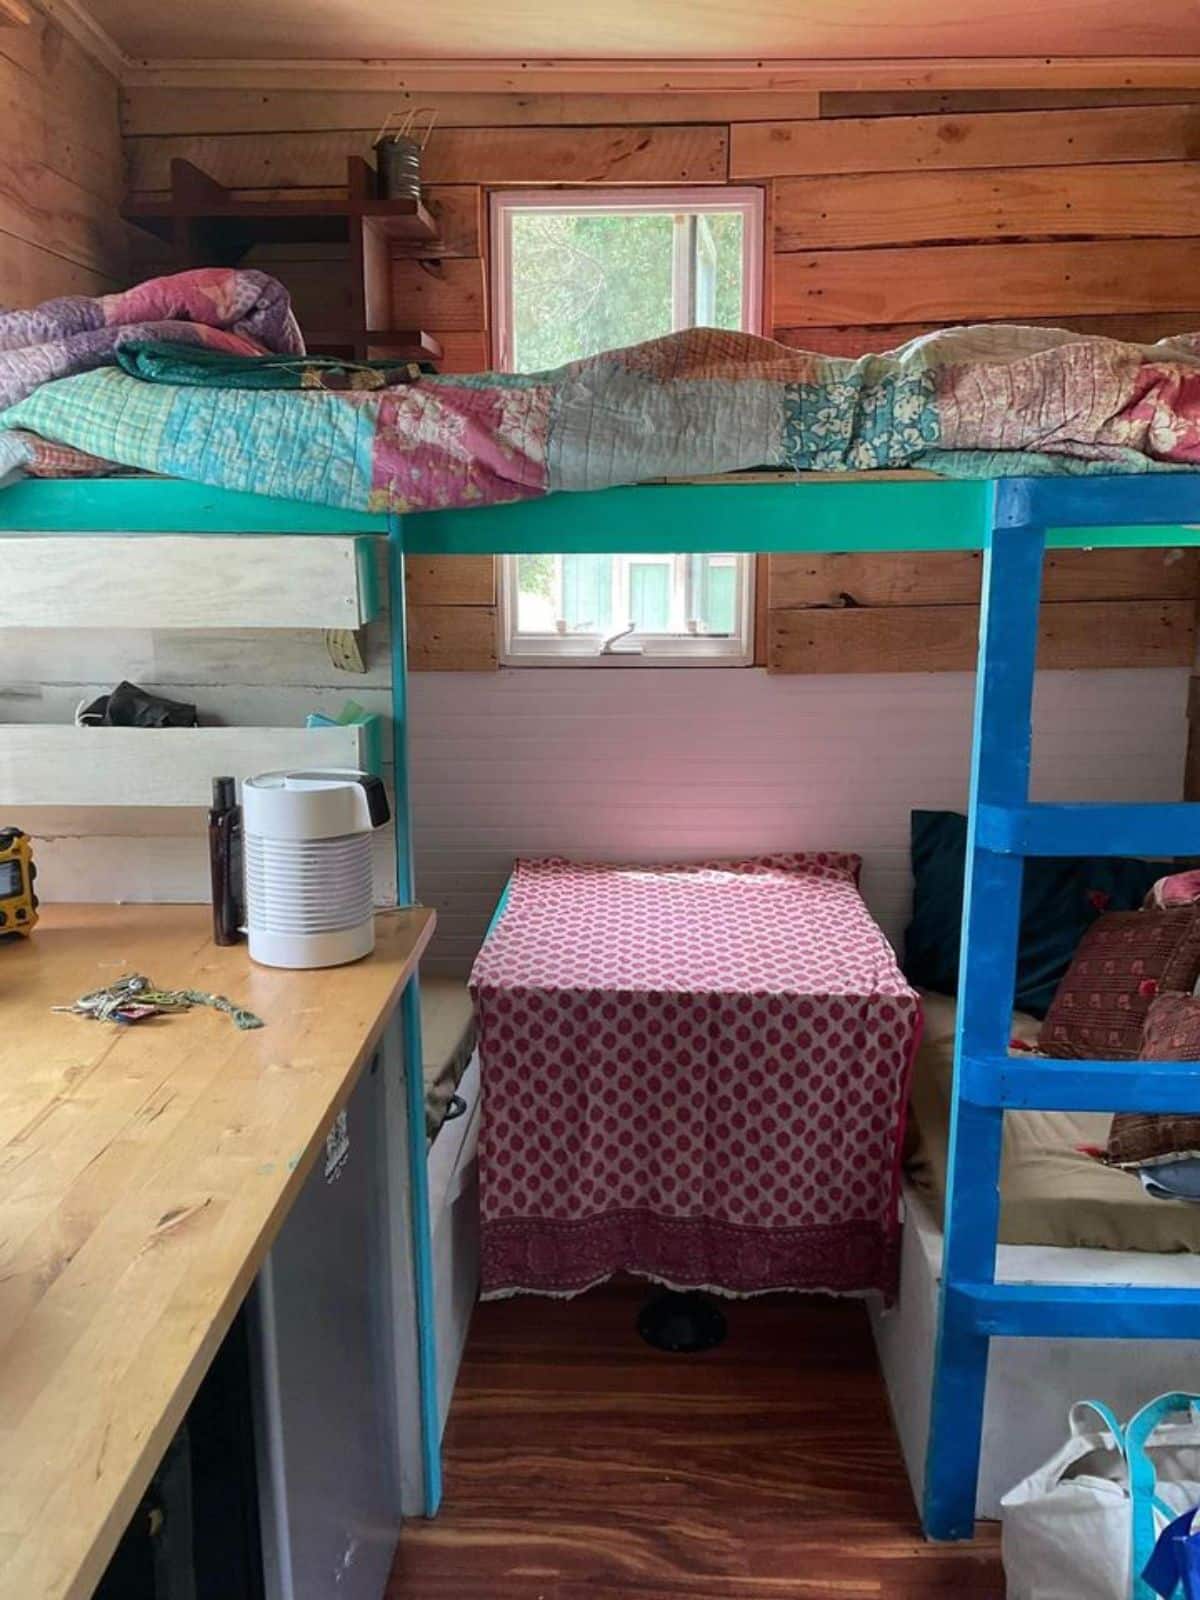 Living area and loft bedroom of 12’ Micro Tiny House